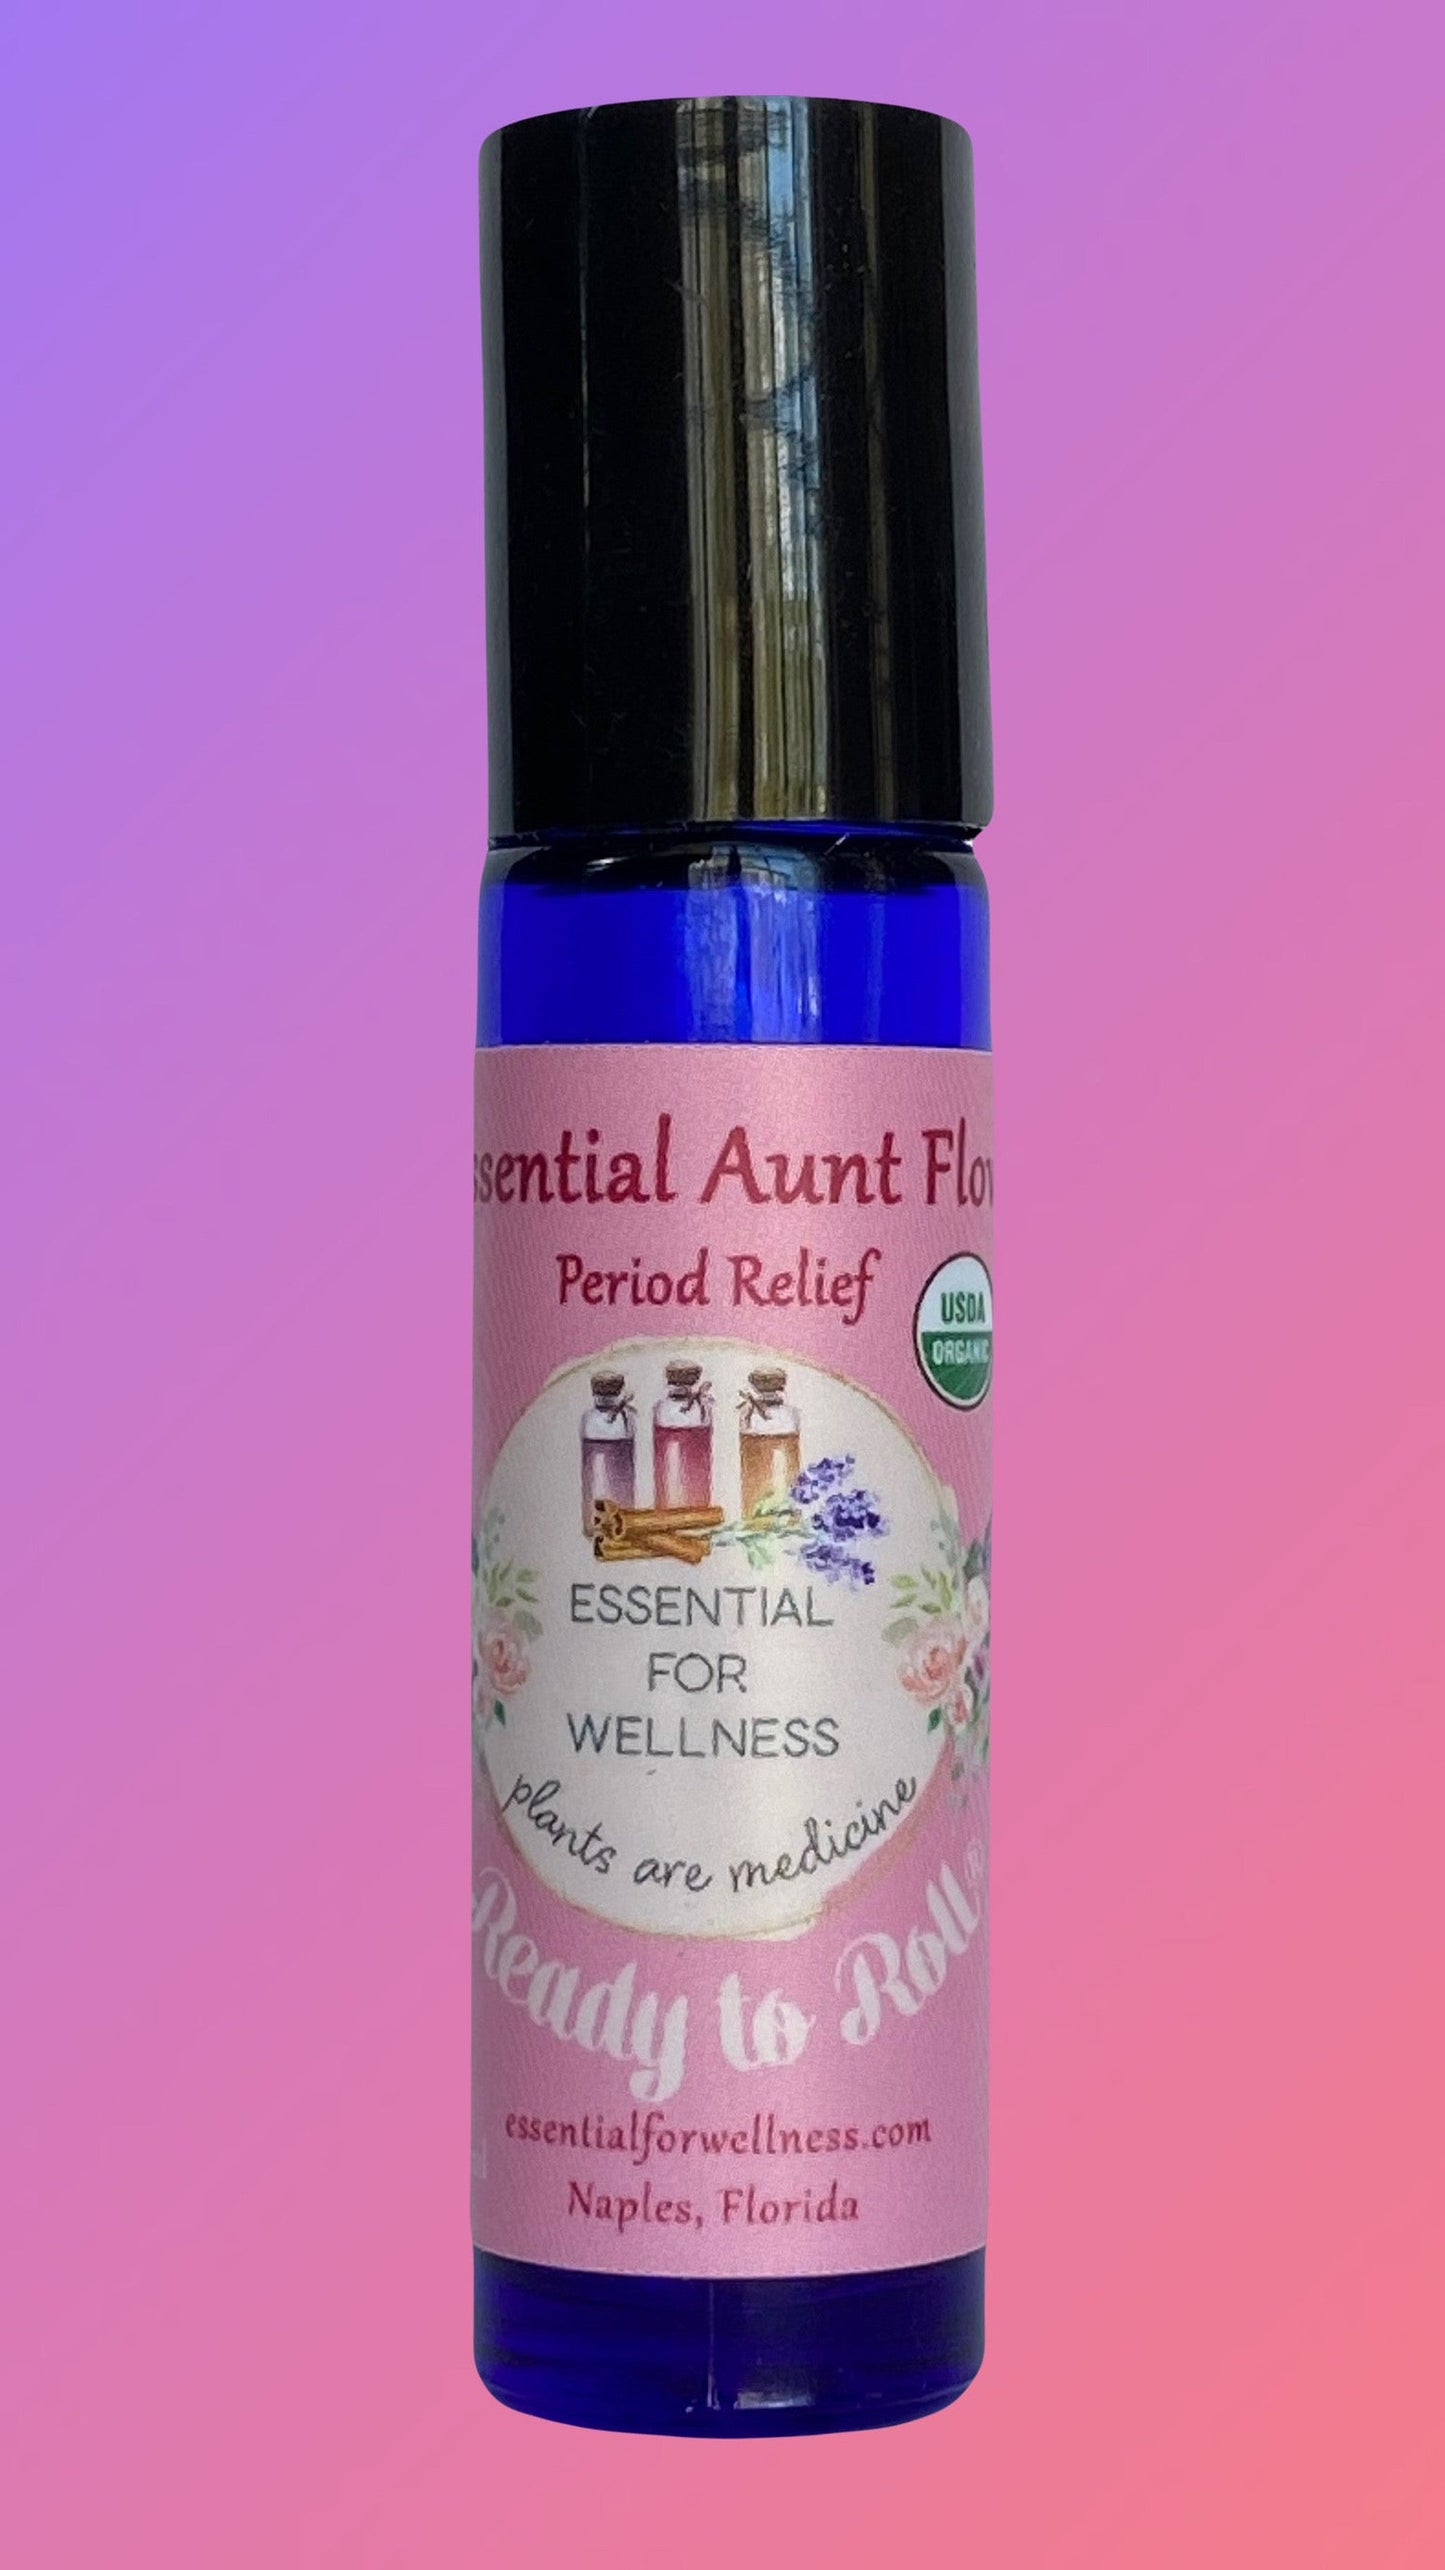 Ready to Roll® Essential Aunt Flow Organic Essential Oil Blend